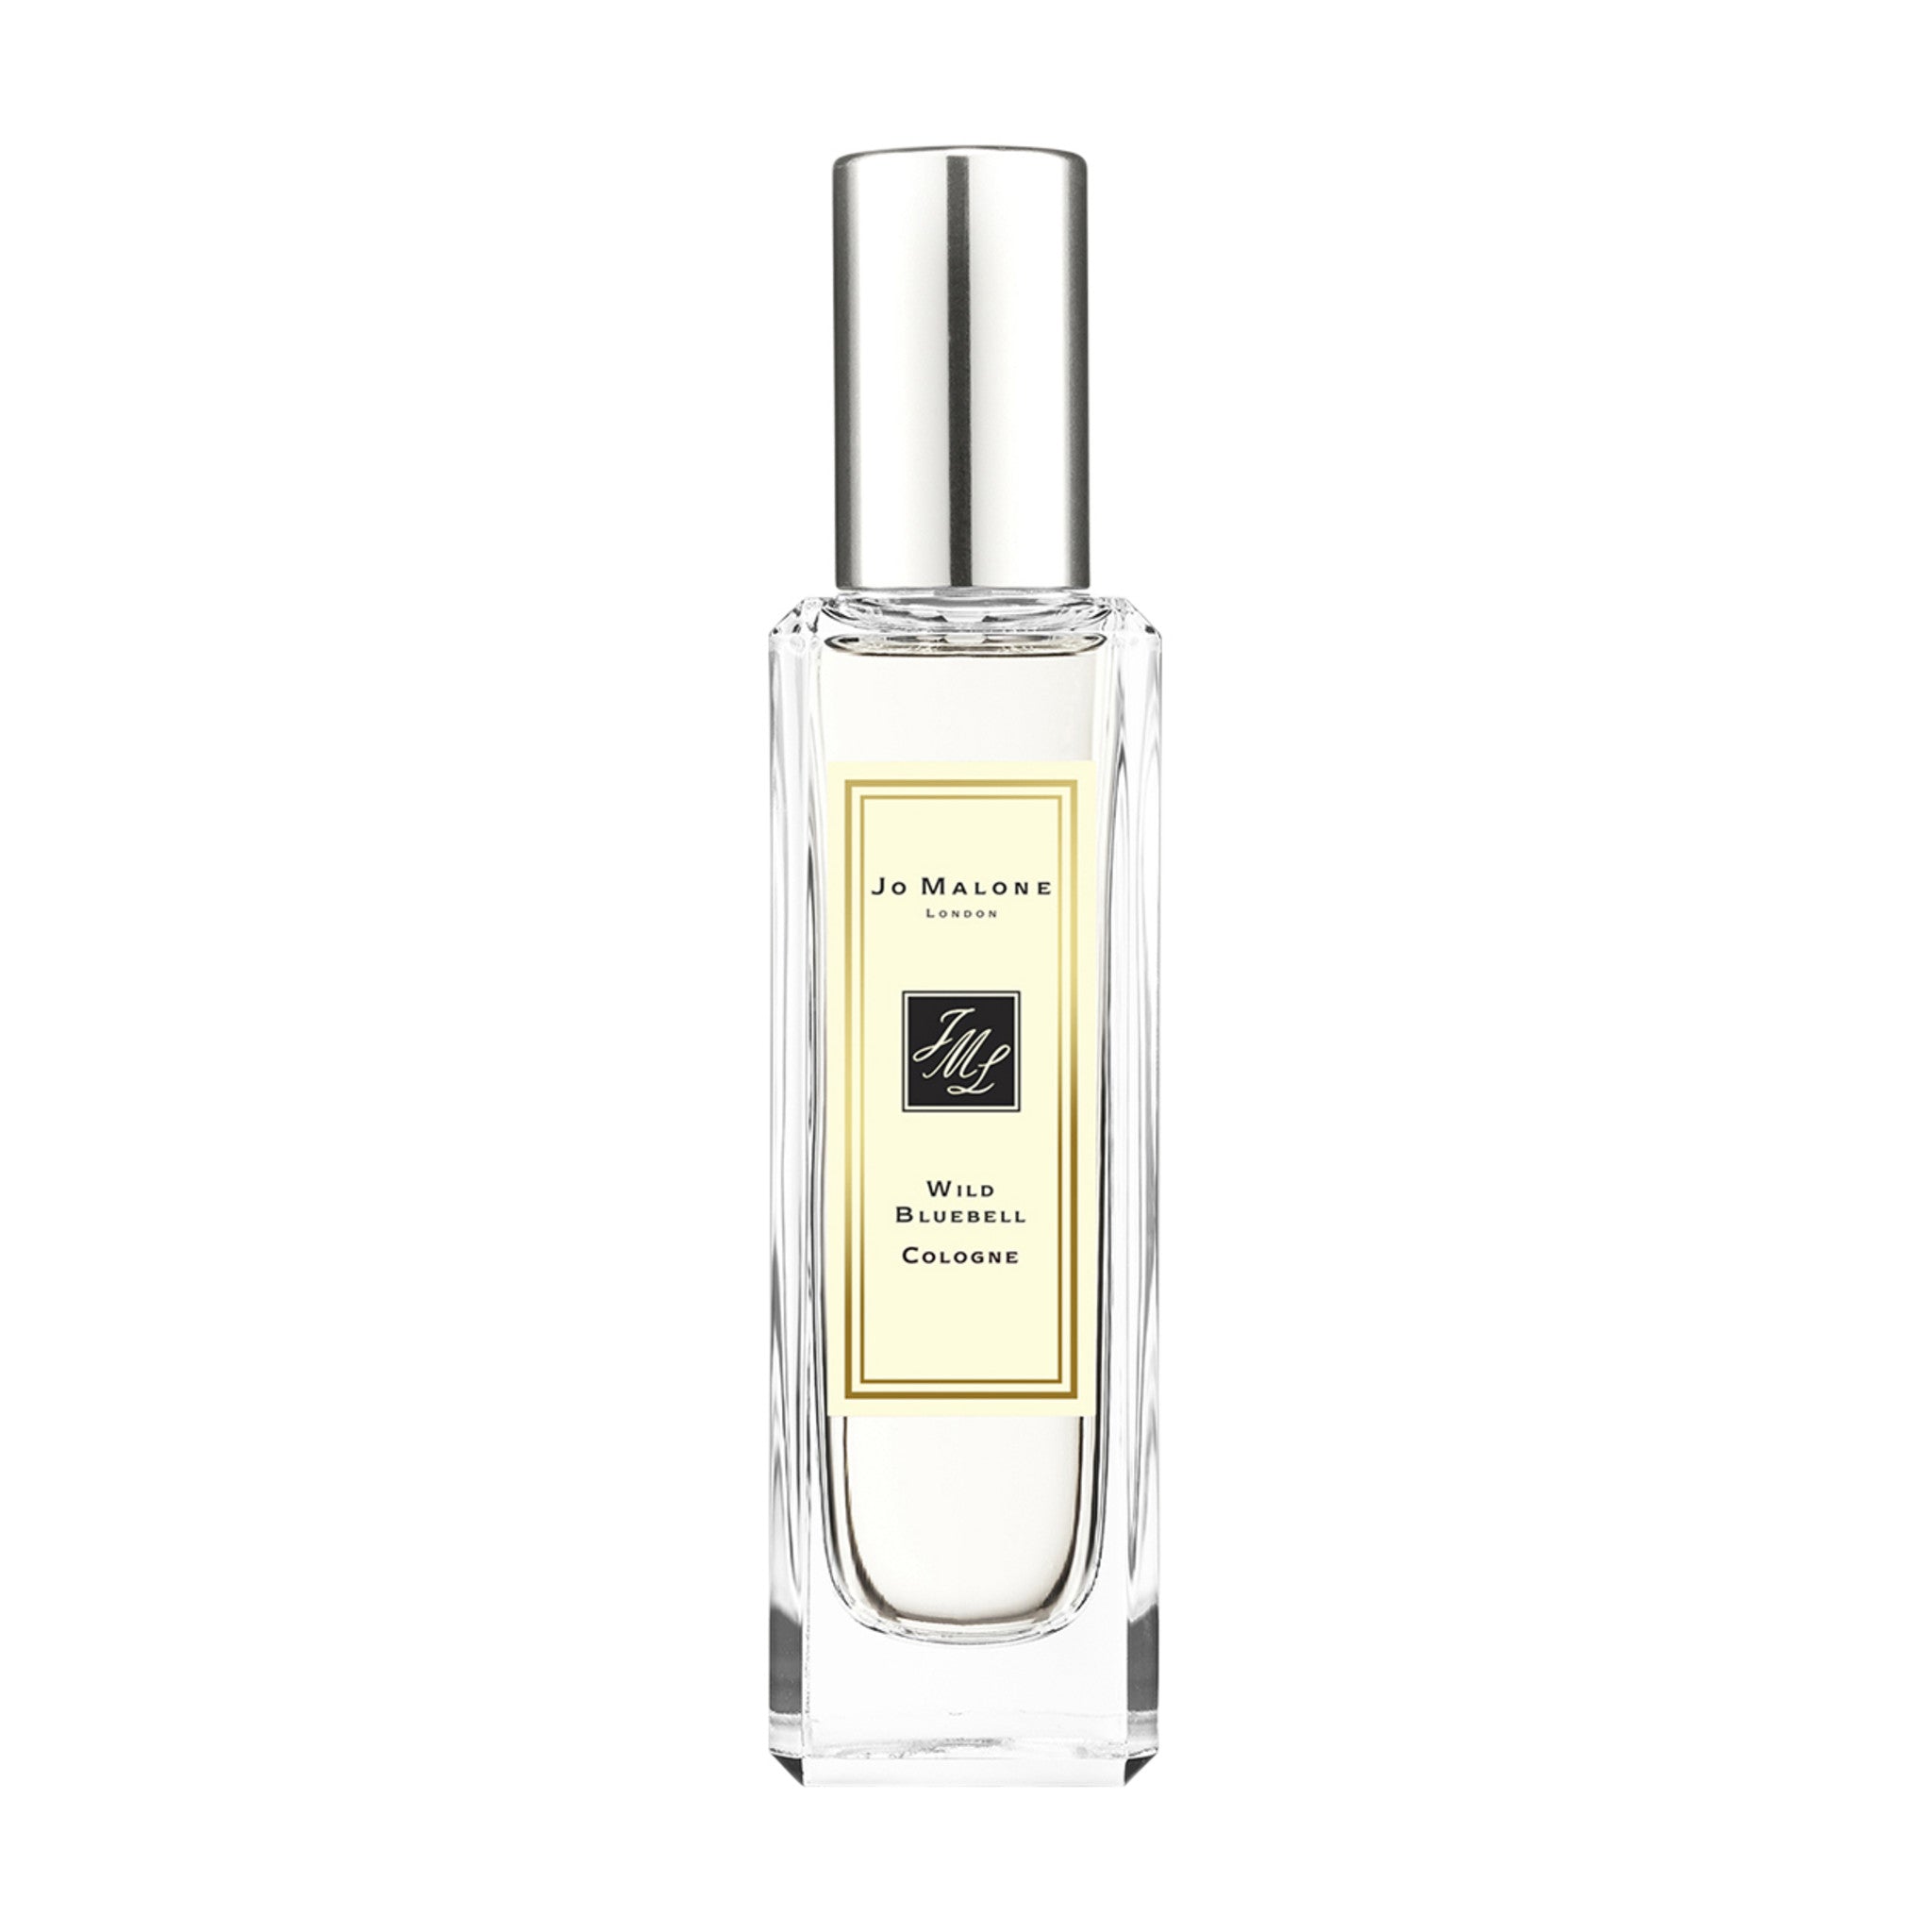 Jo Malone London Wild Bluebell Cologne Size variant: 30 ml main image.